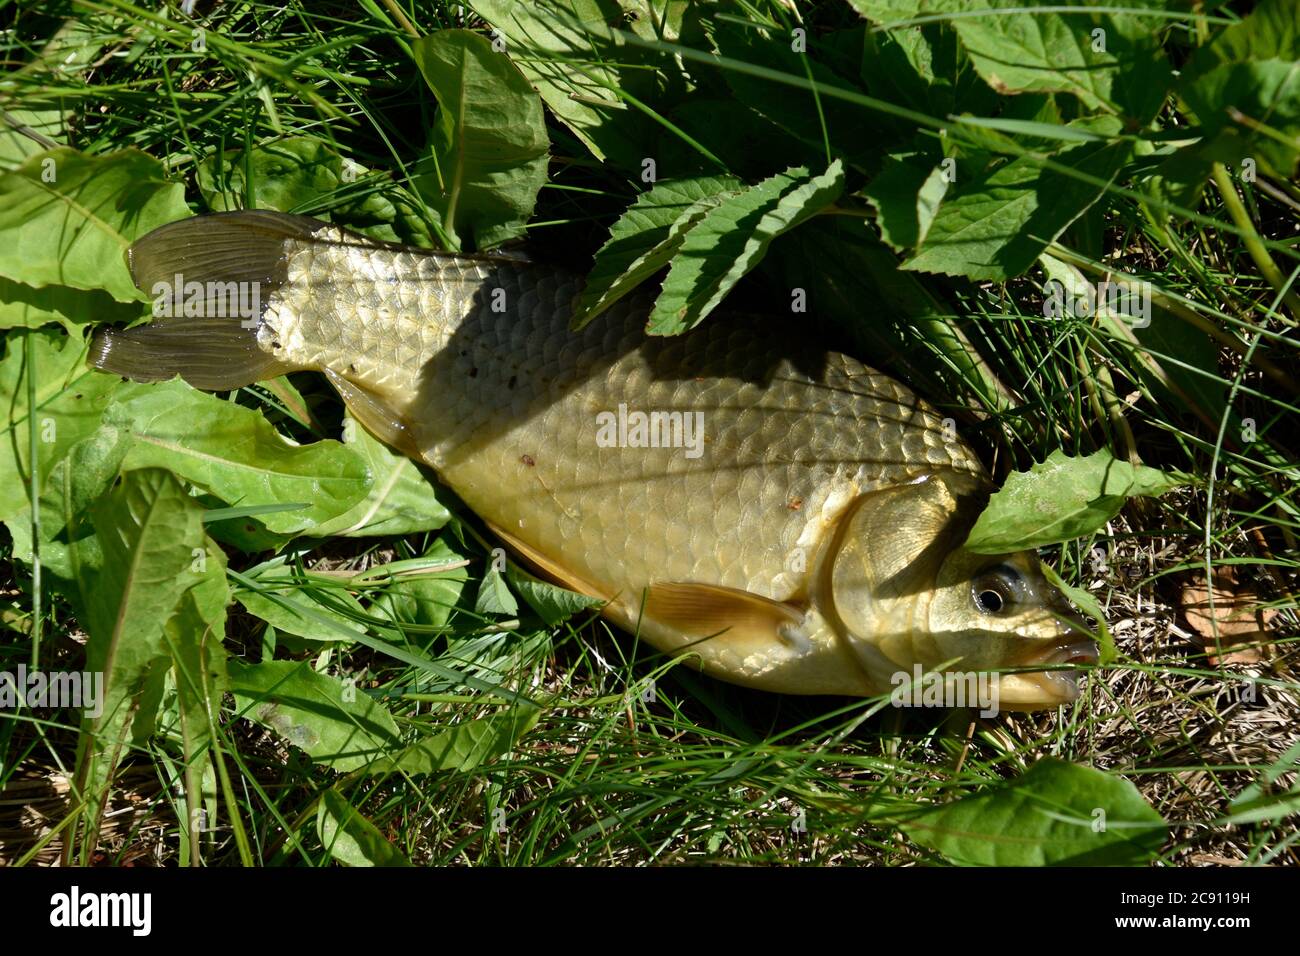 Alive fish out of water, crucian carp. Stock Photo